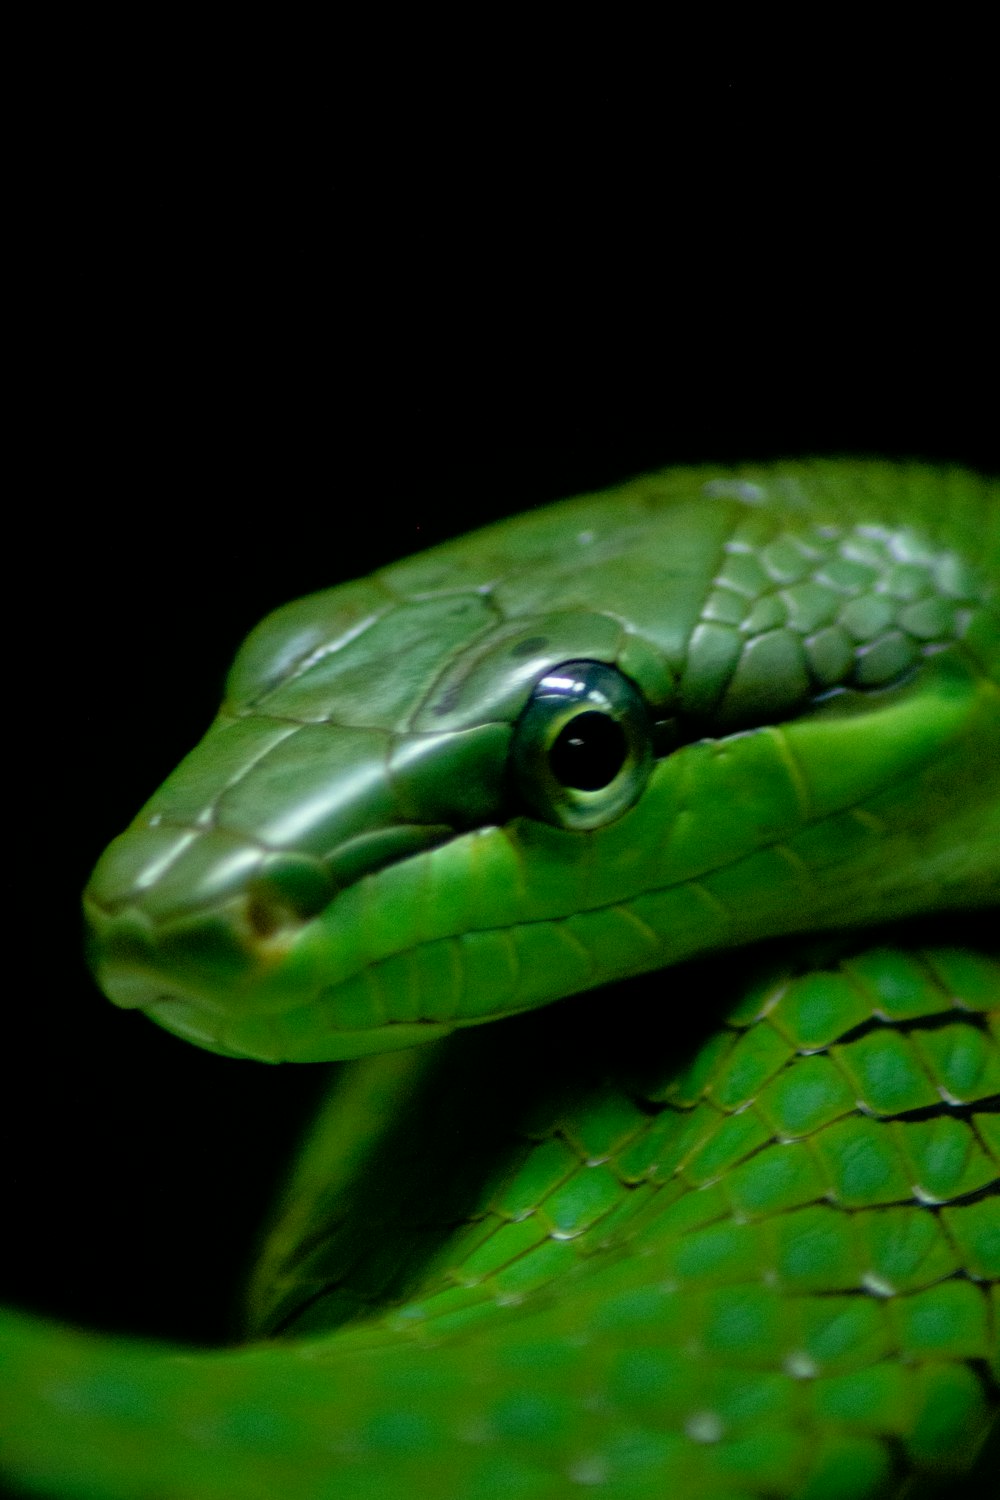 a close up of a green snake on a black background